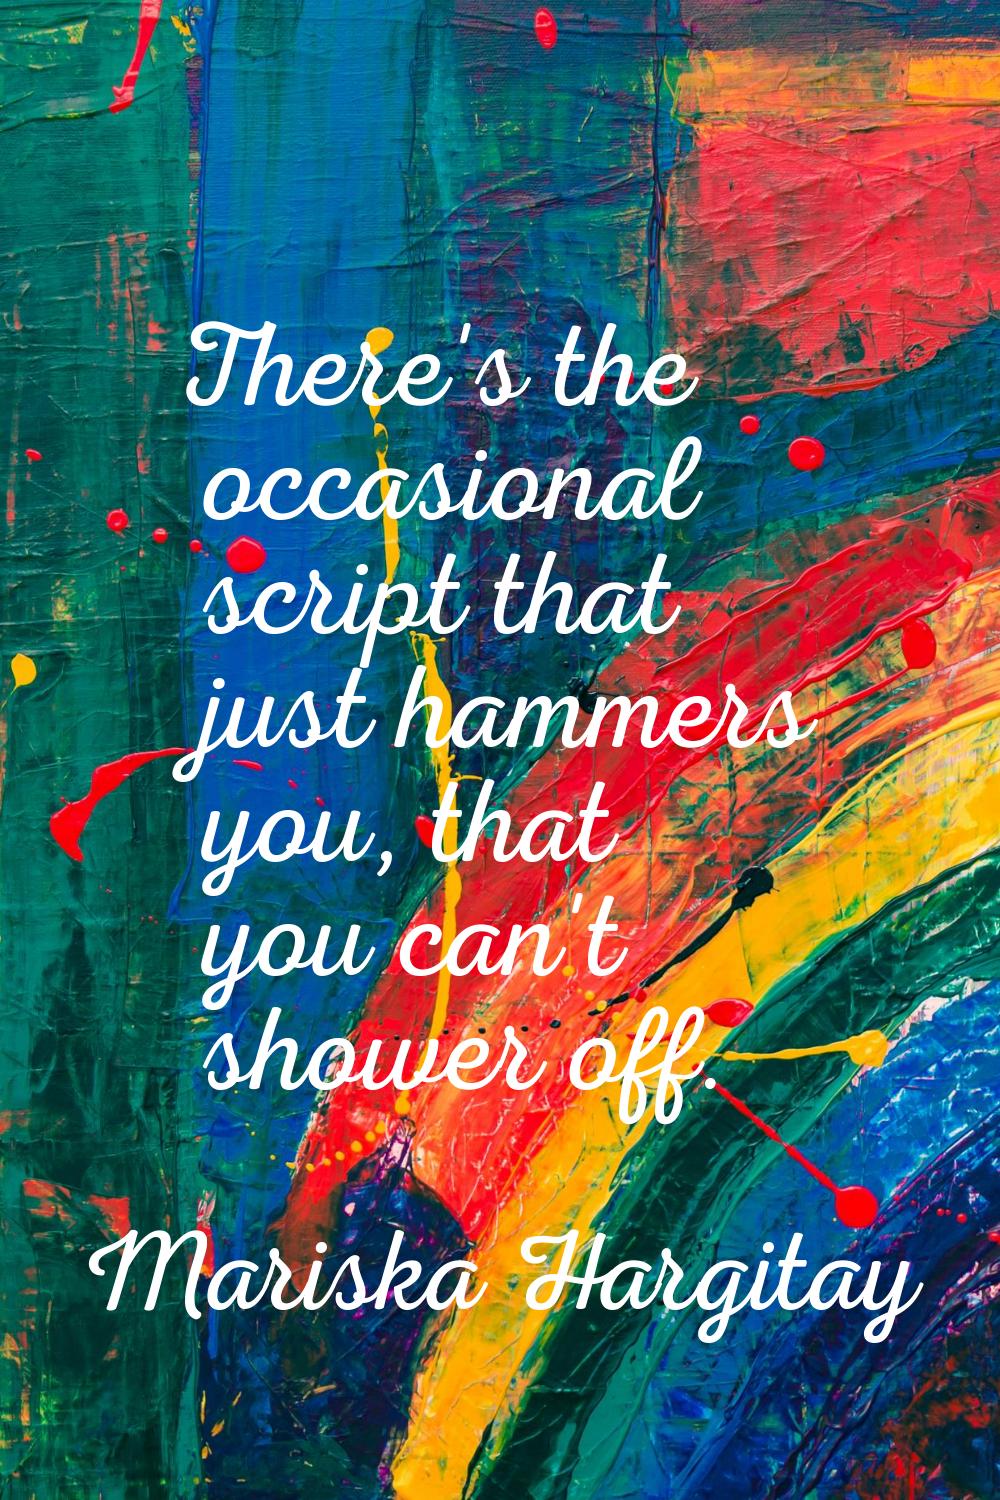 There's the occasional script that just hammers you, that you can't shower off.